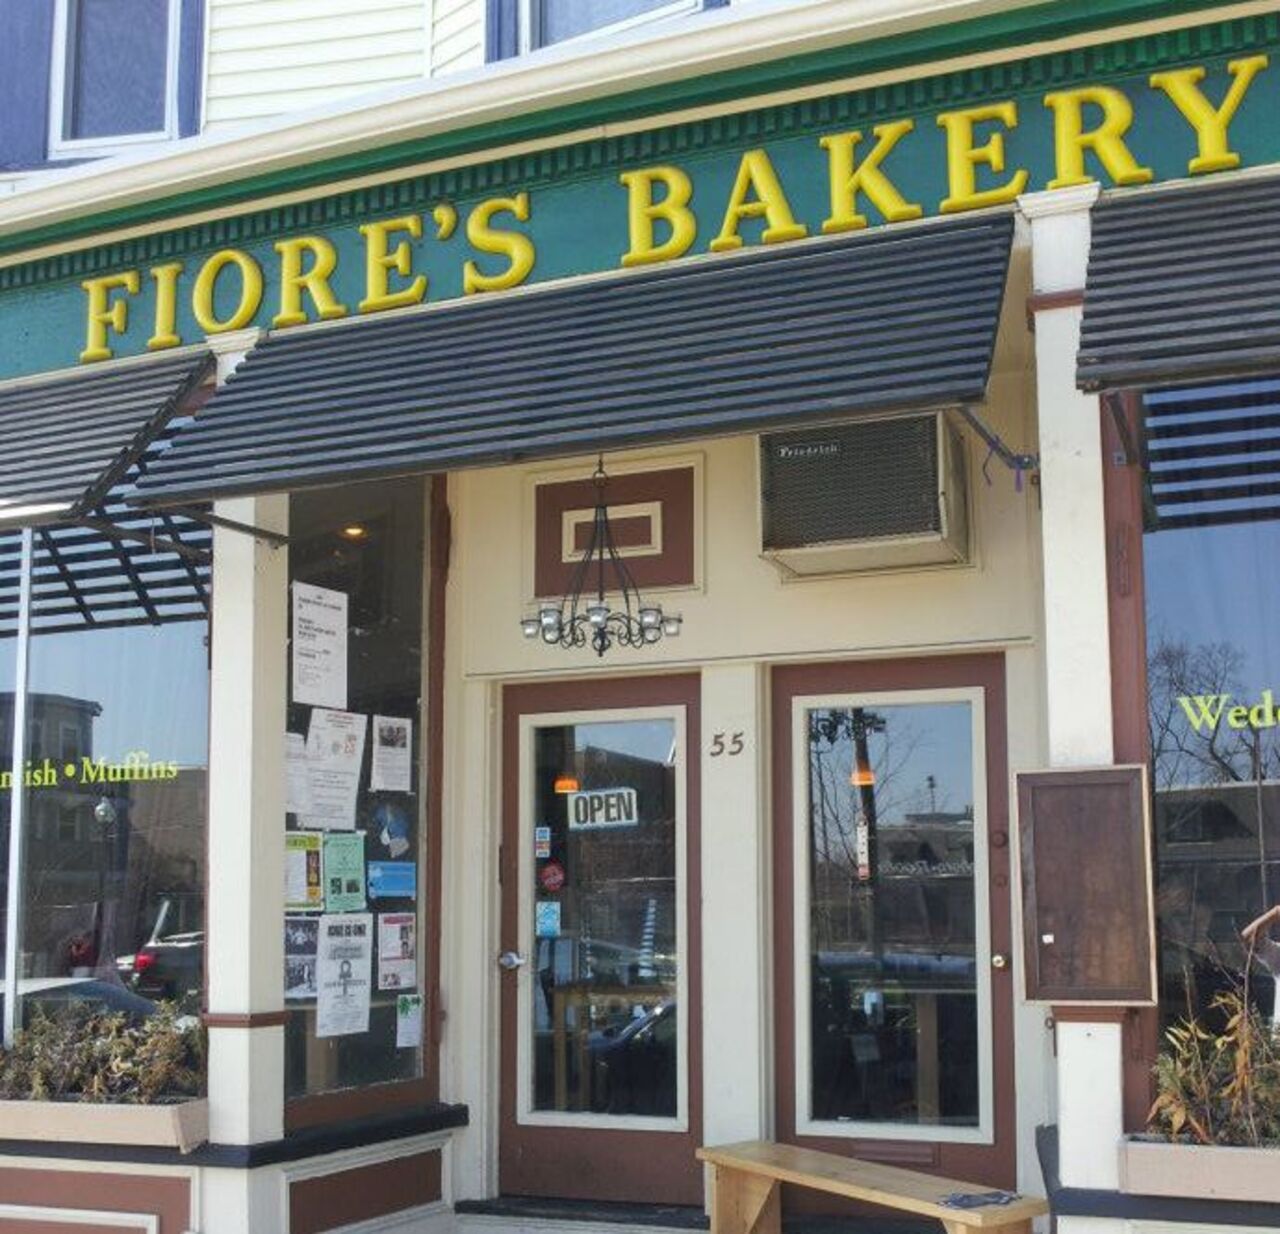 A photo of Fiore's Bakery